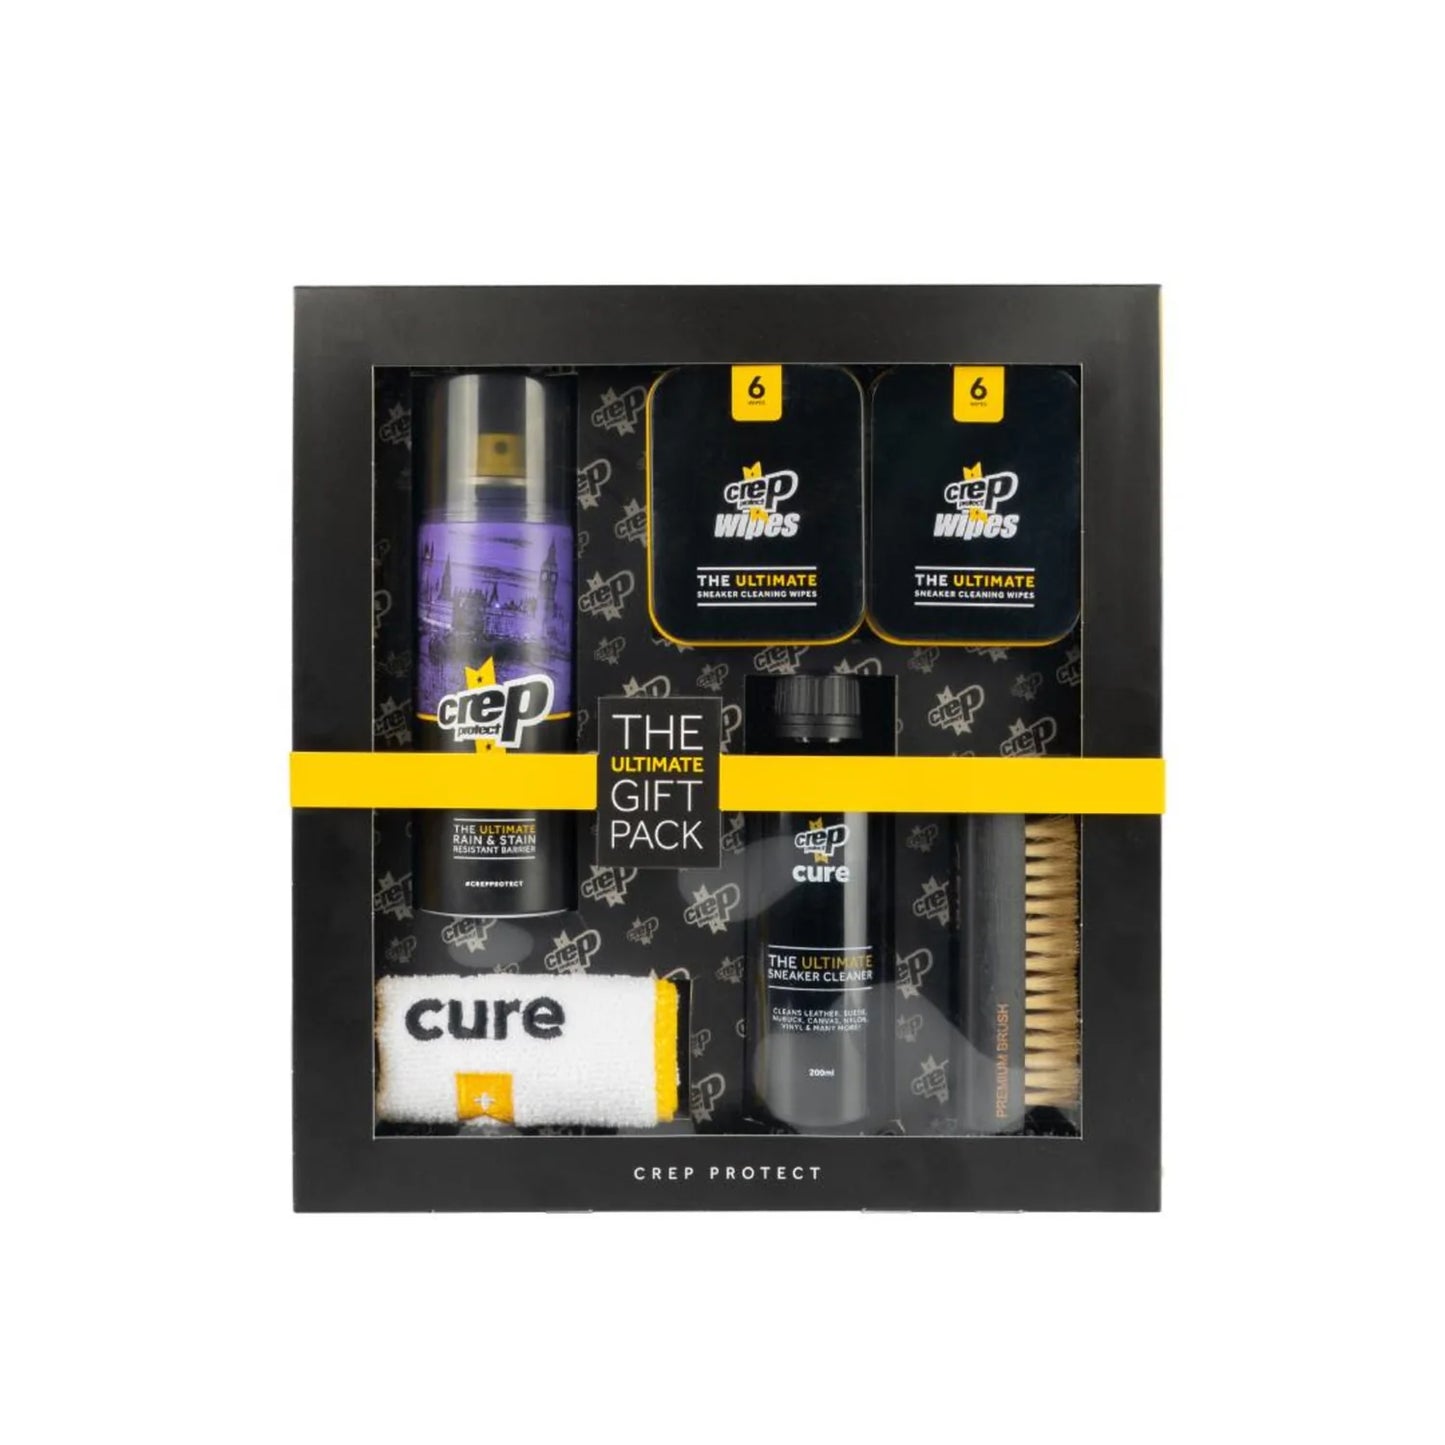 CREP PROTECT - ULTIMATE GIFT PACK